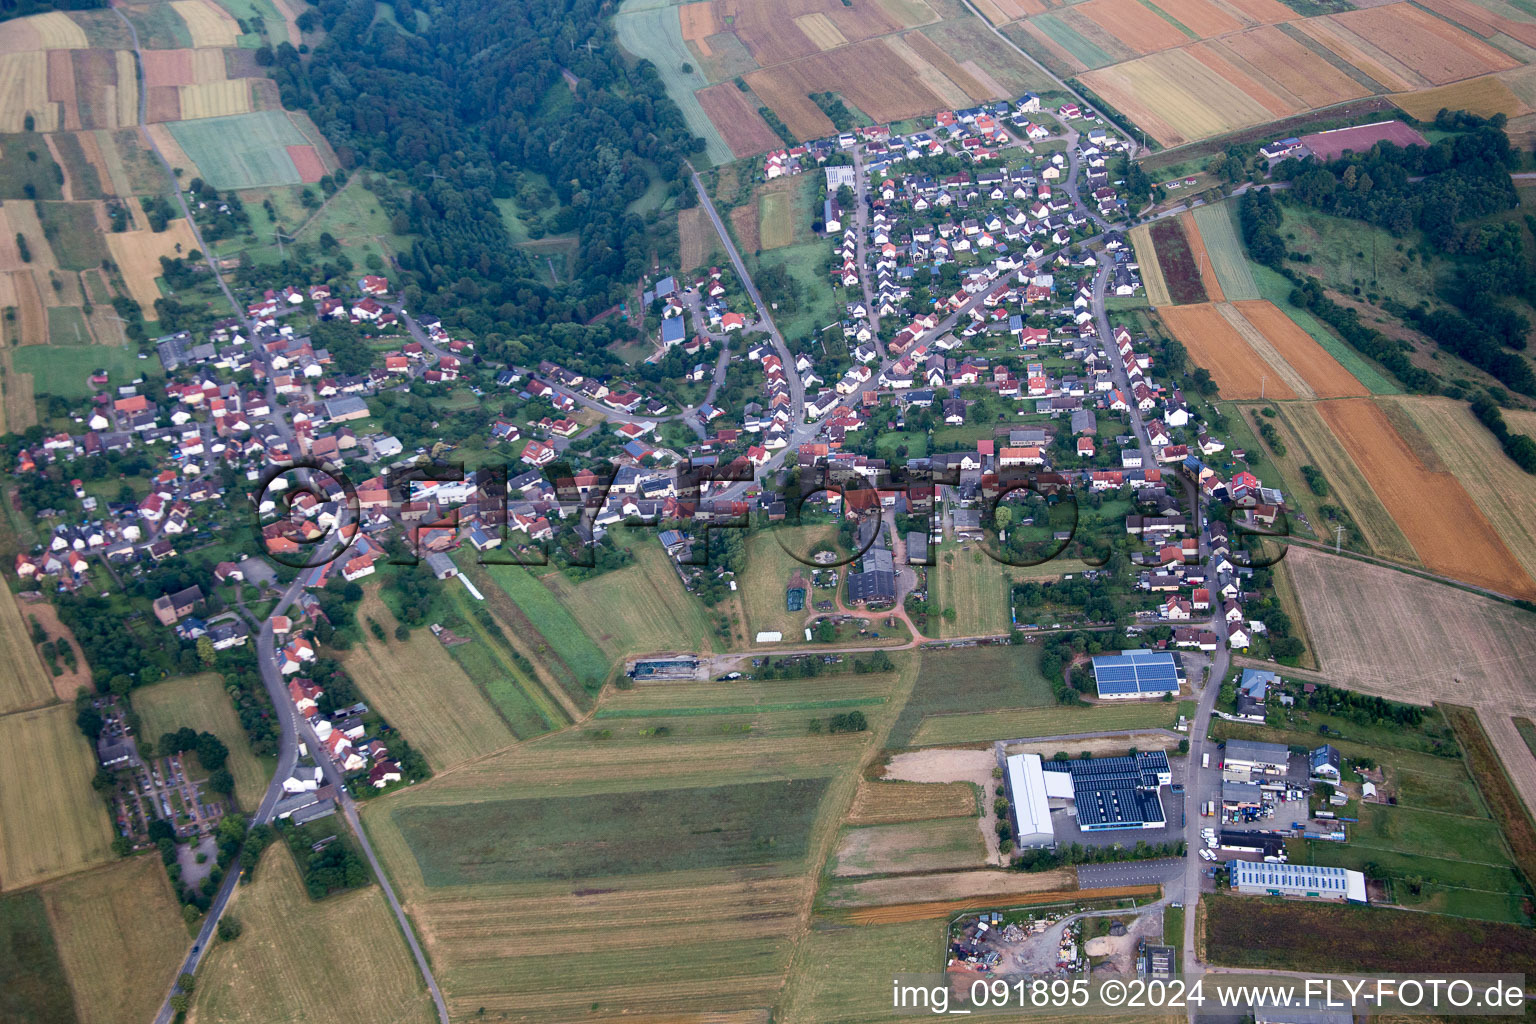 Aerial view of Village - view on the edge of agricultural fields and farmland in Donsieders in the state Rhineland-Palatinate